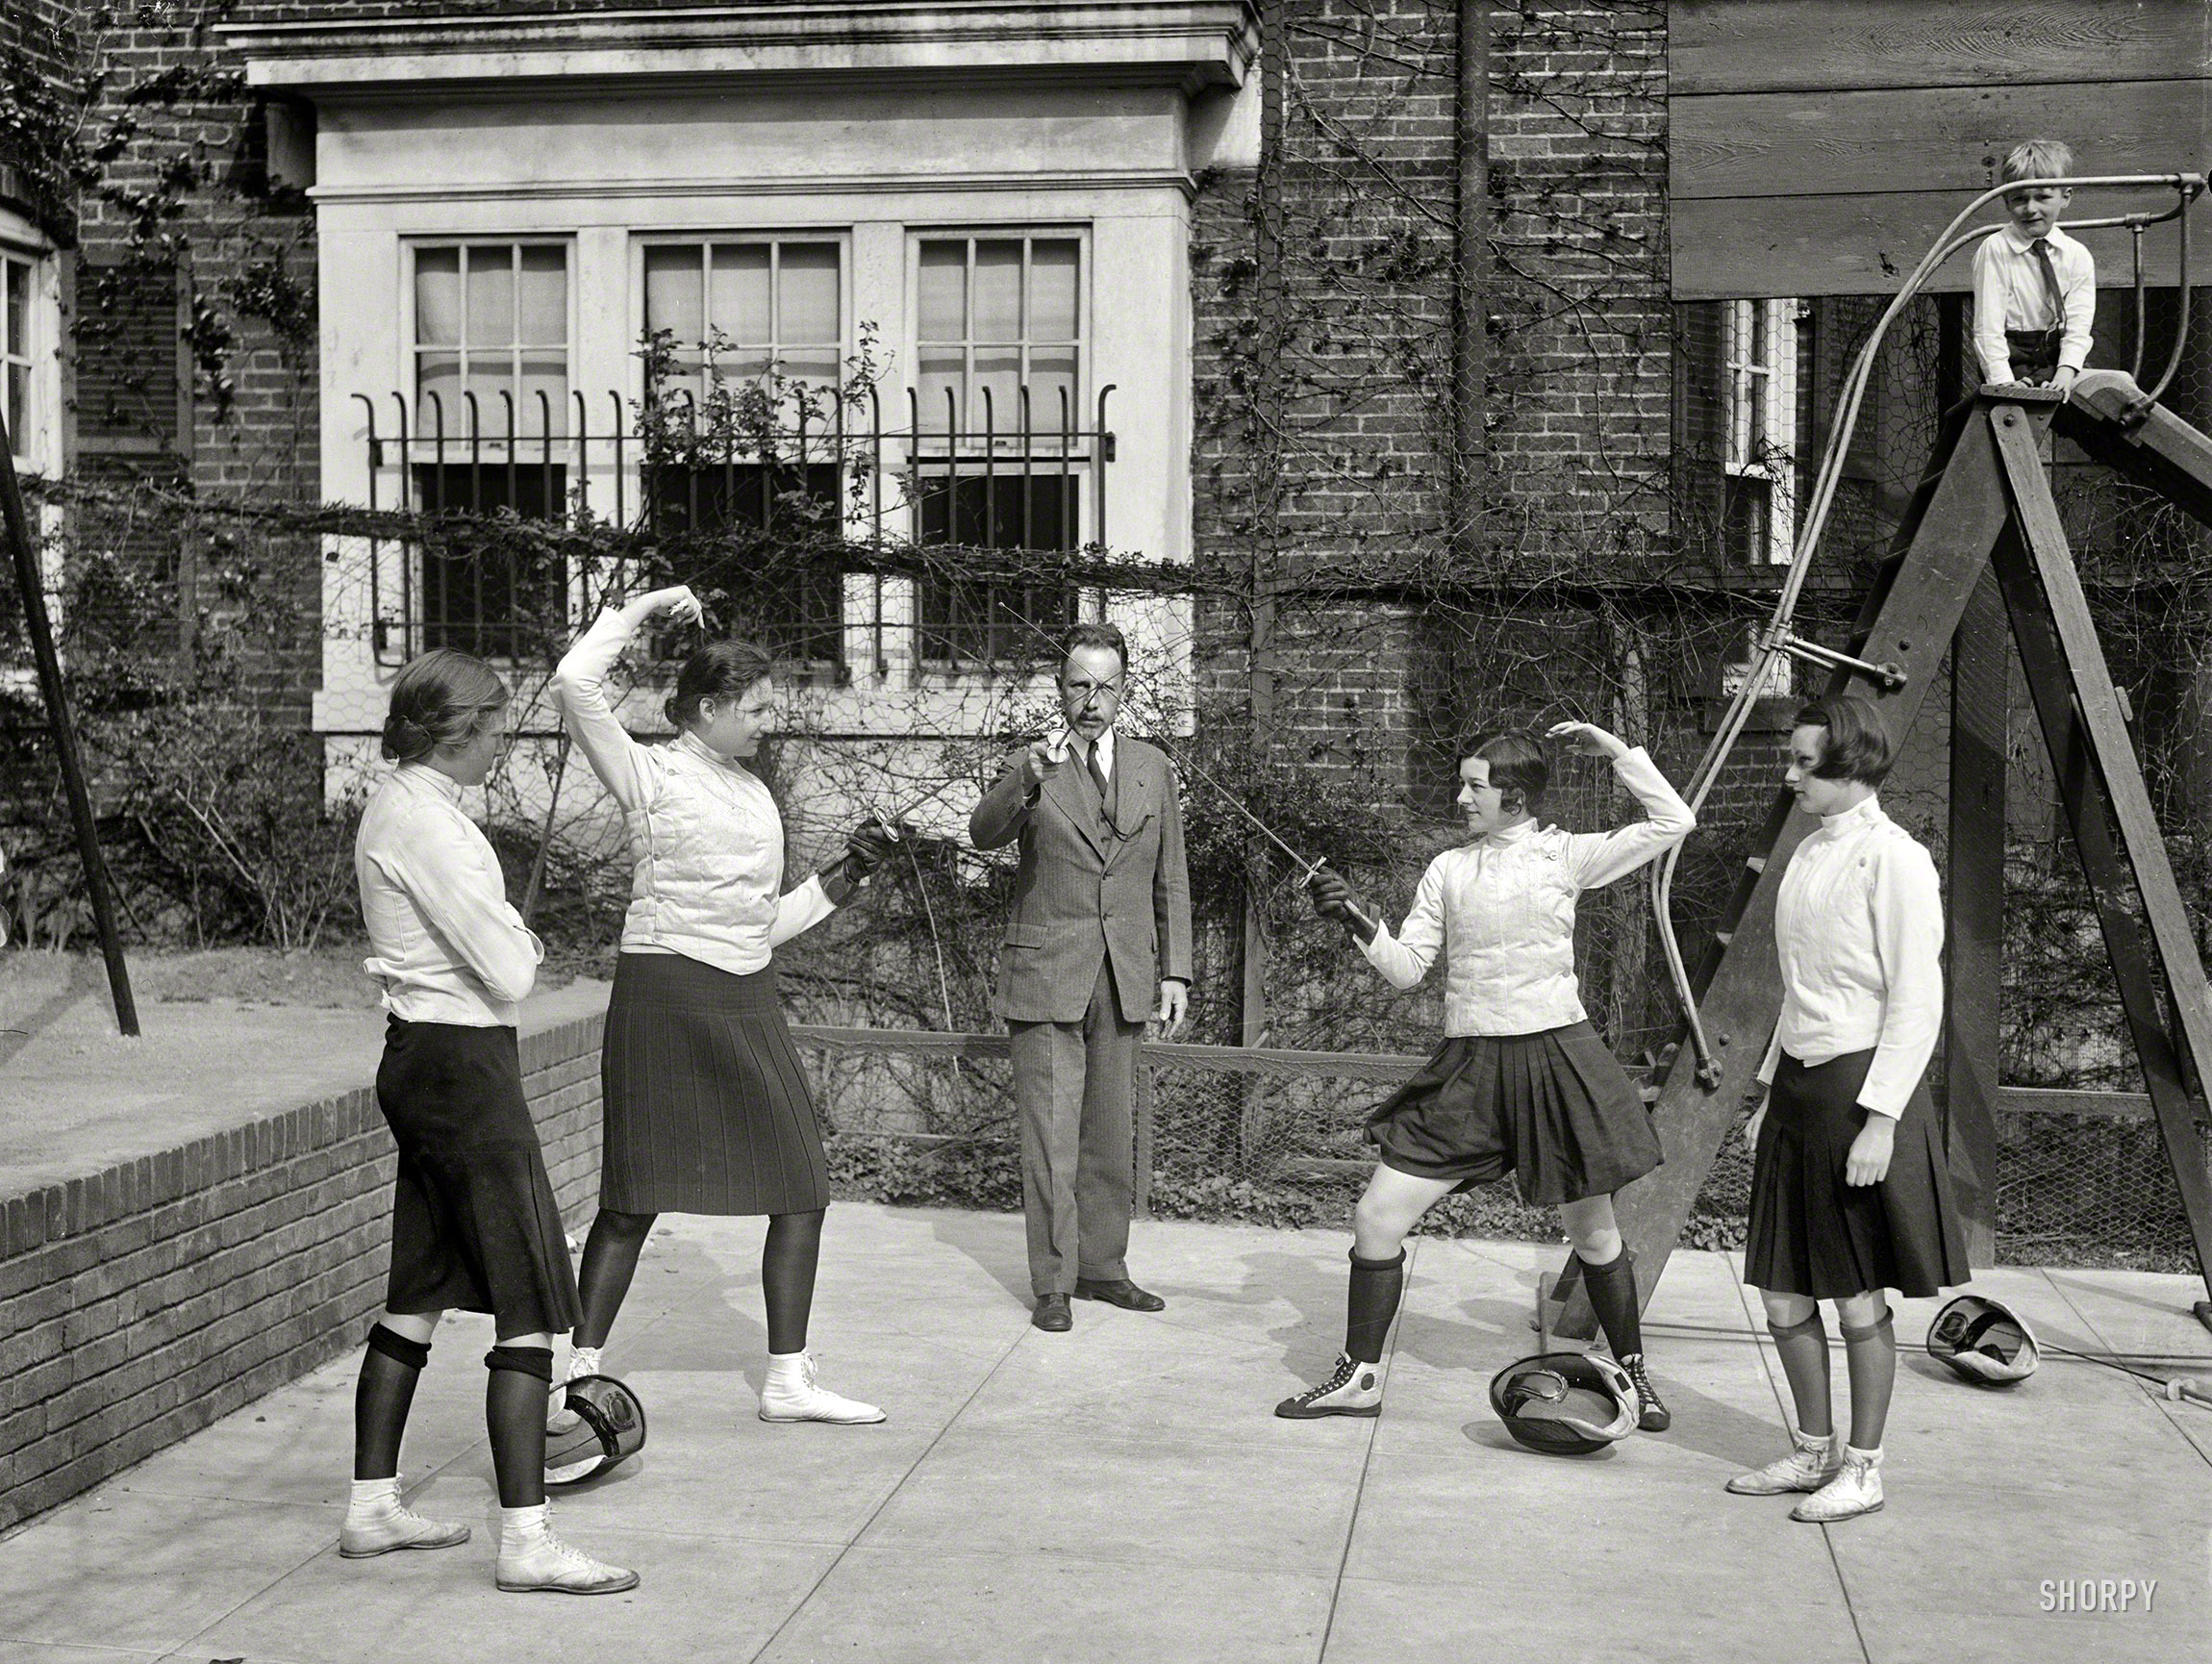 April 16, 1930. "These Washington society girls will compete for fencing title of the District of Columbia at the Mayflower Hotel this week. Left to right: Elizabeth Bunting, judge; Priscilla Holcombe; Maj. Walter E. Blunt, referee; Margaret Montgomery; and Lillian Shuman, judge." Harris & Ewing. View full size.